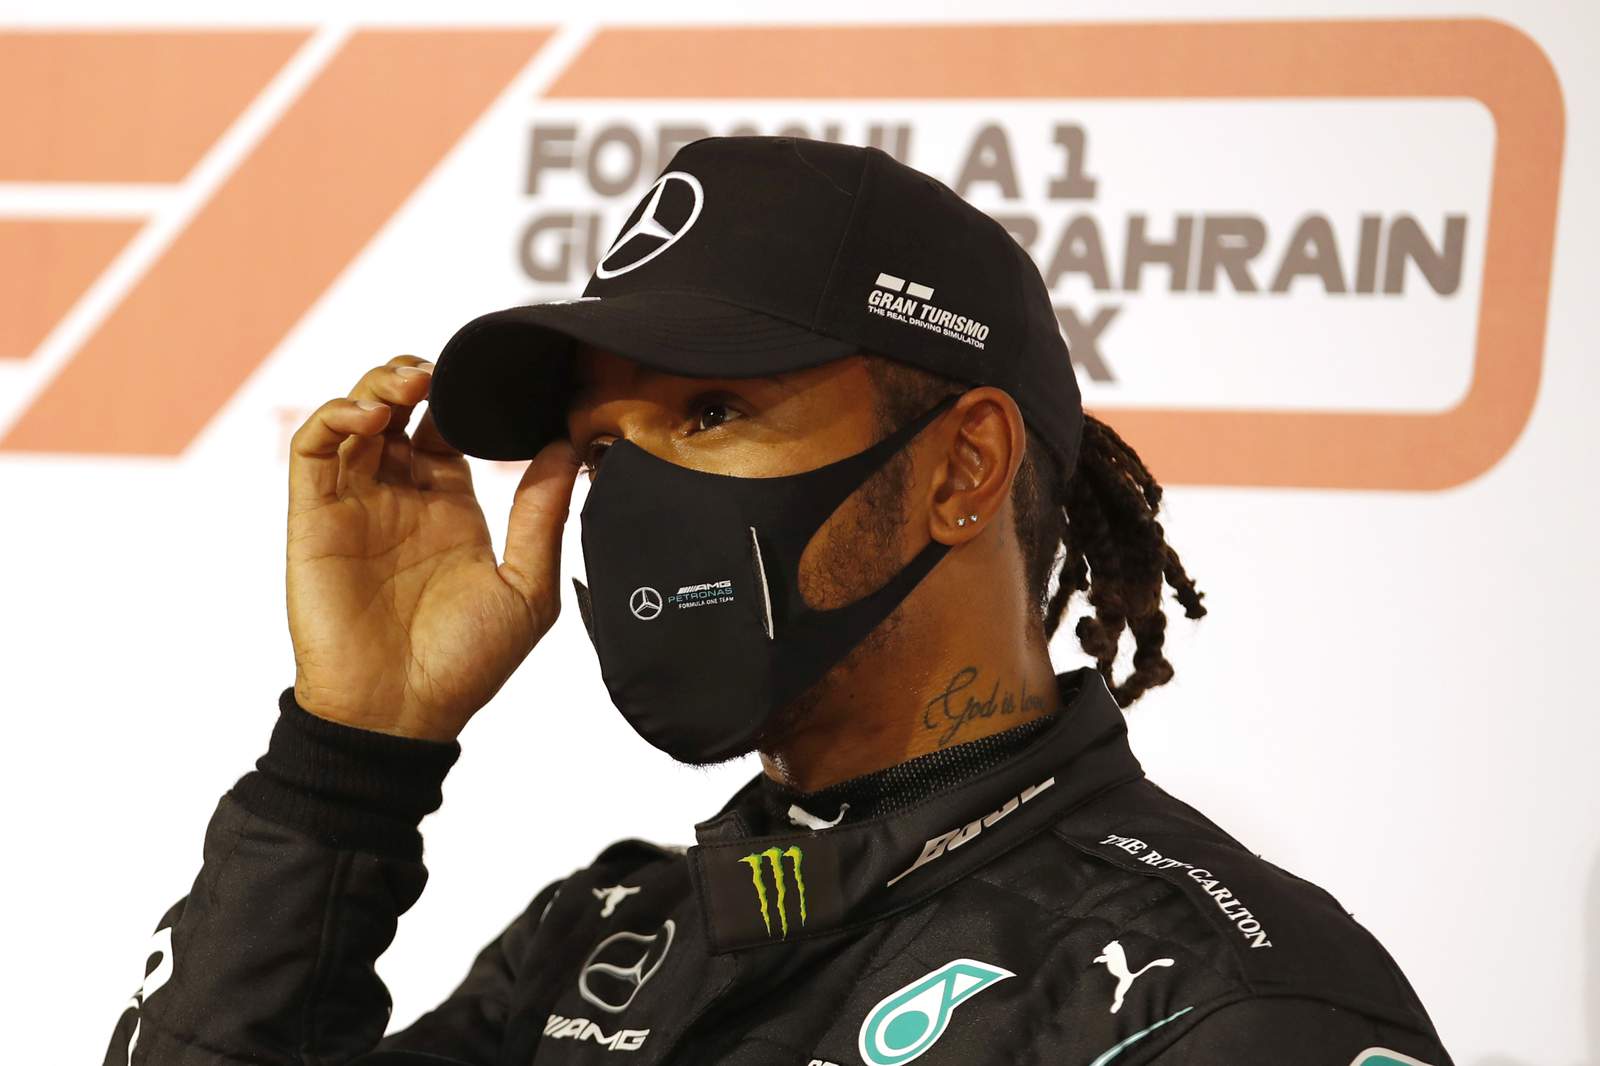 Hamilton positive for COVID-19, will miss F1's Sakhir GP